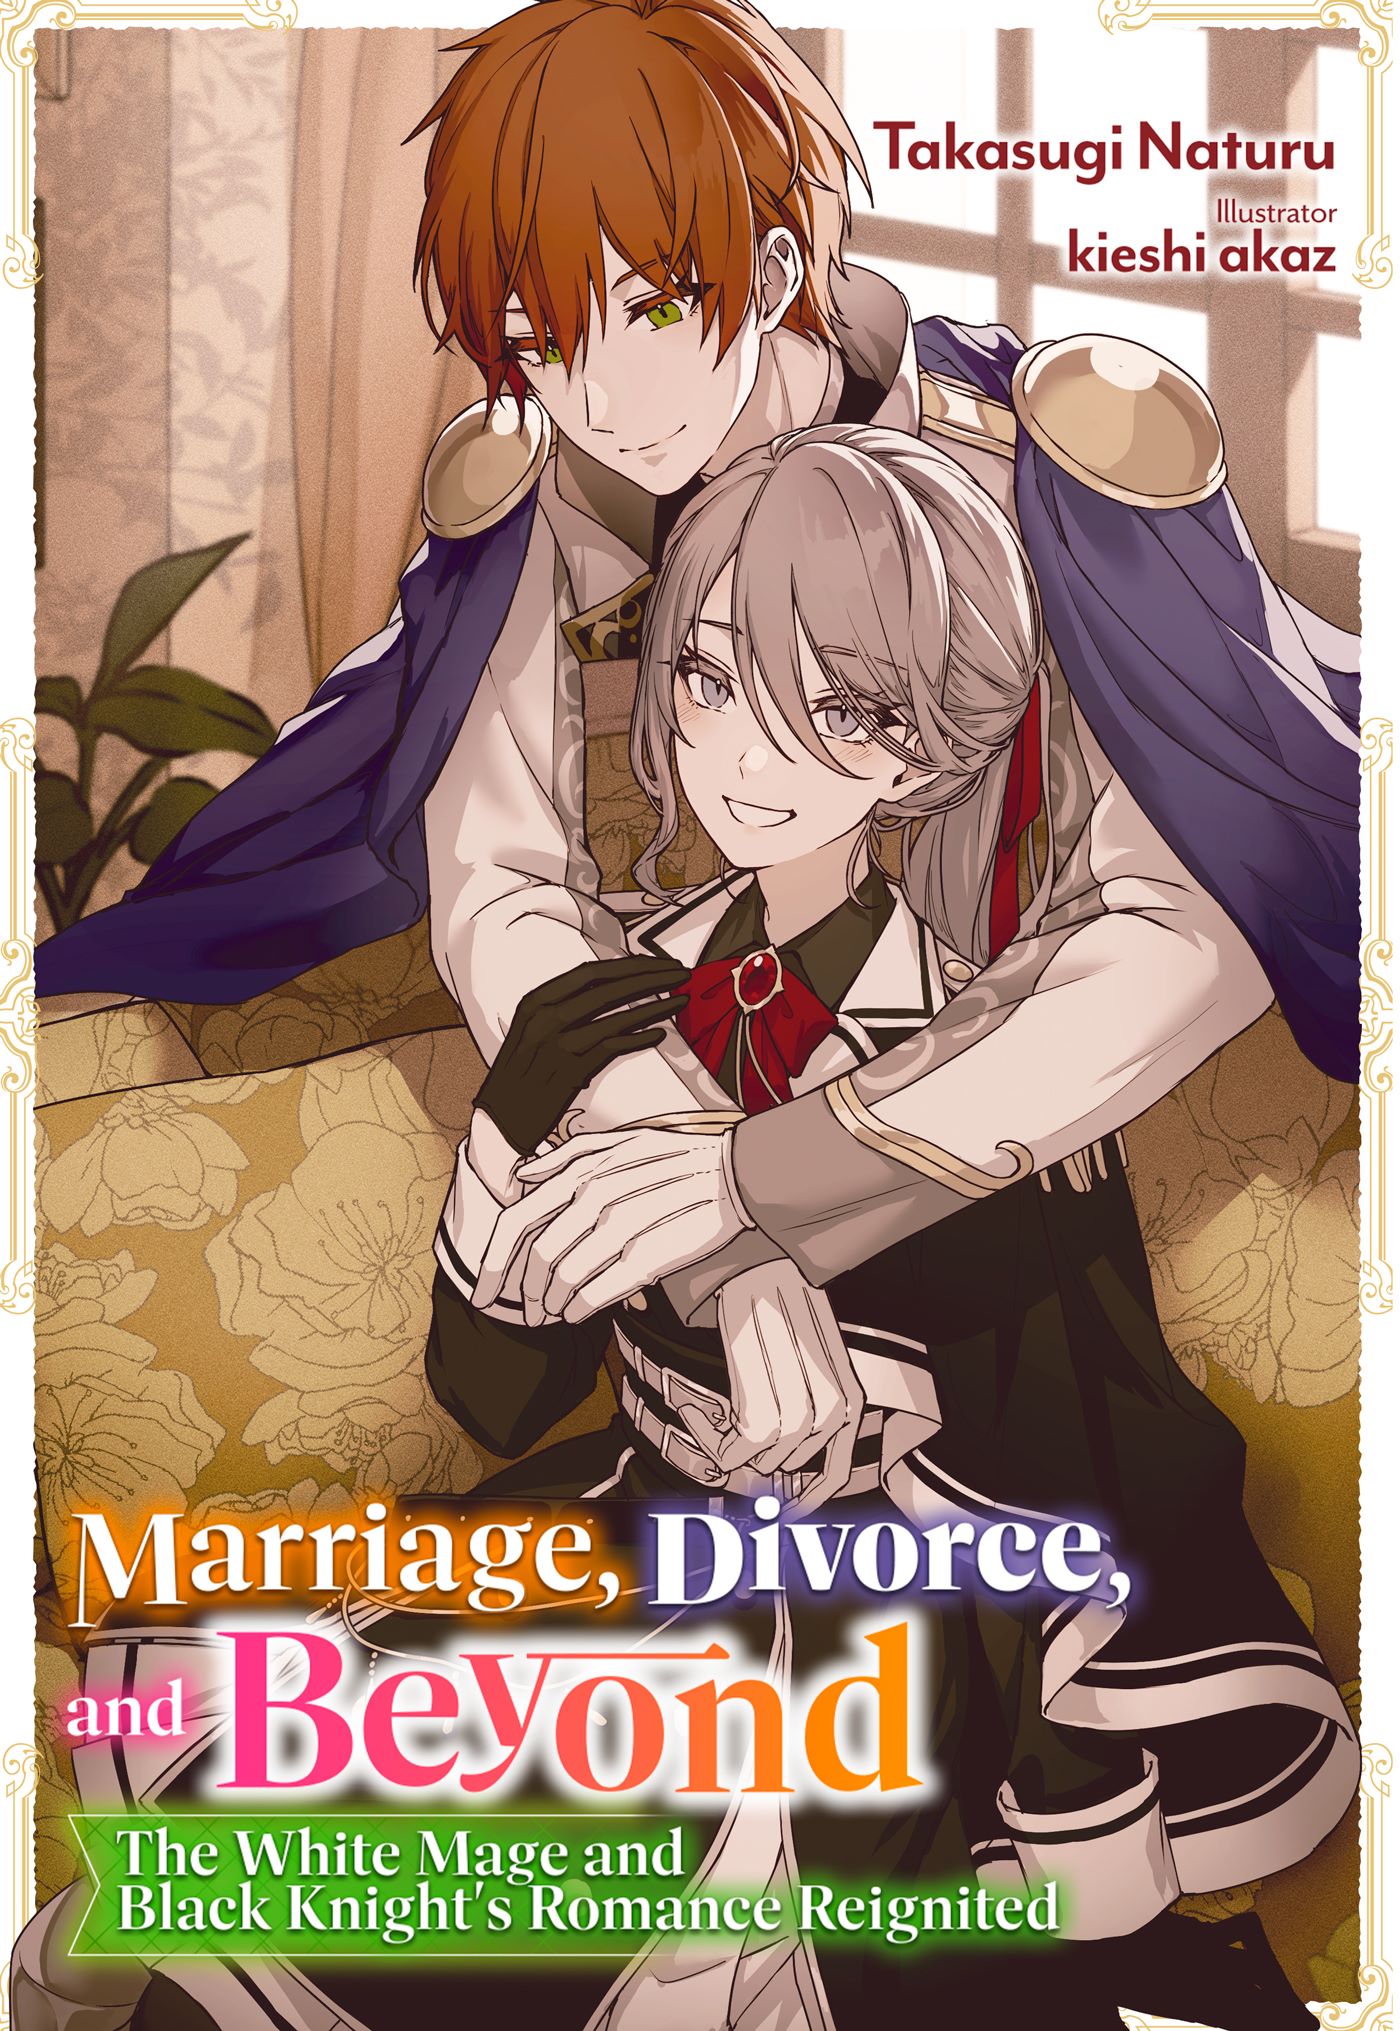 Marriage, Divorce, and Beyond (LN) Volume 1